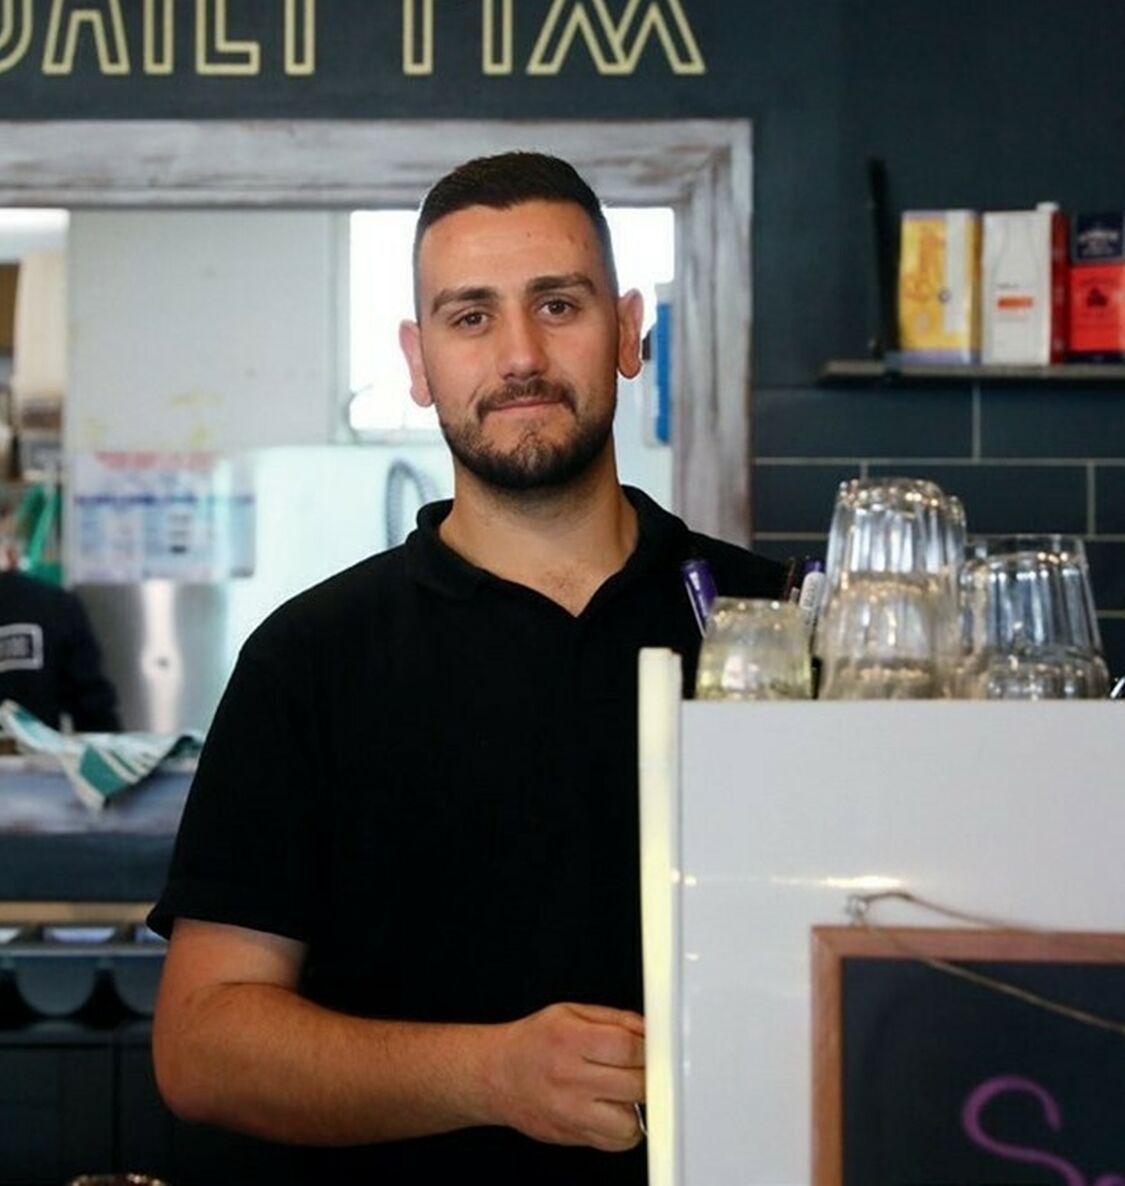 Our favourite local baristas share what they love about Jetty Road ...